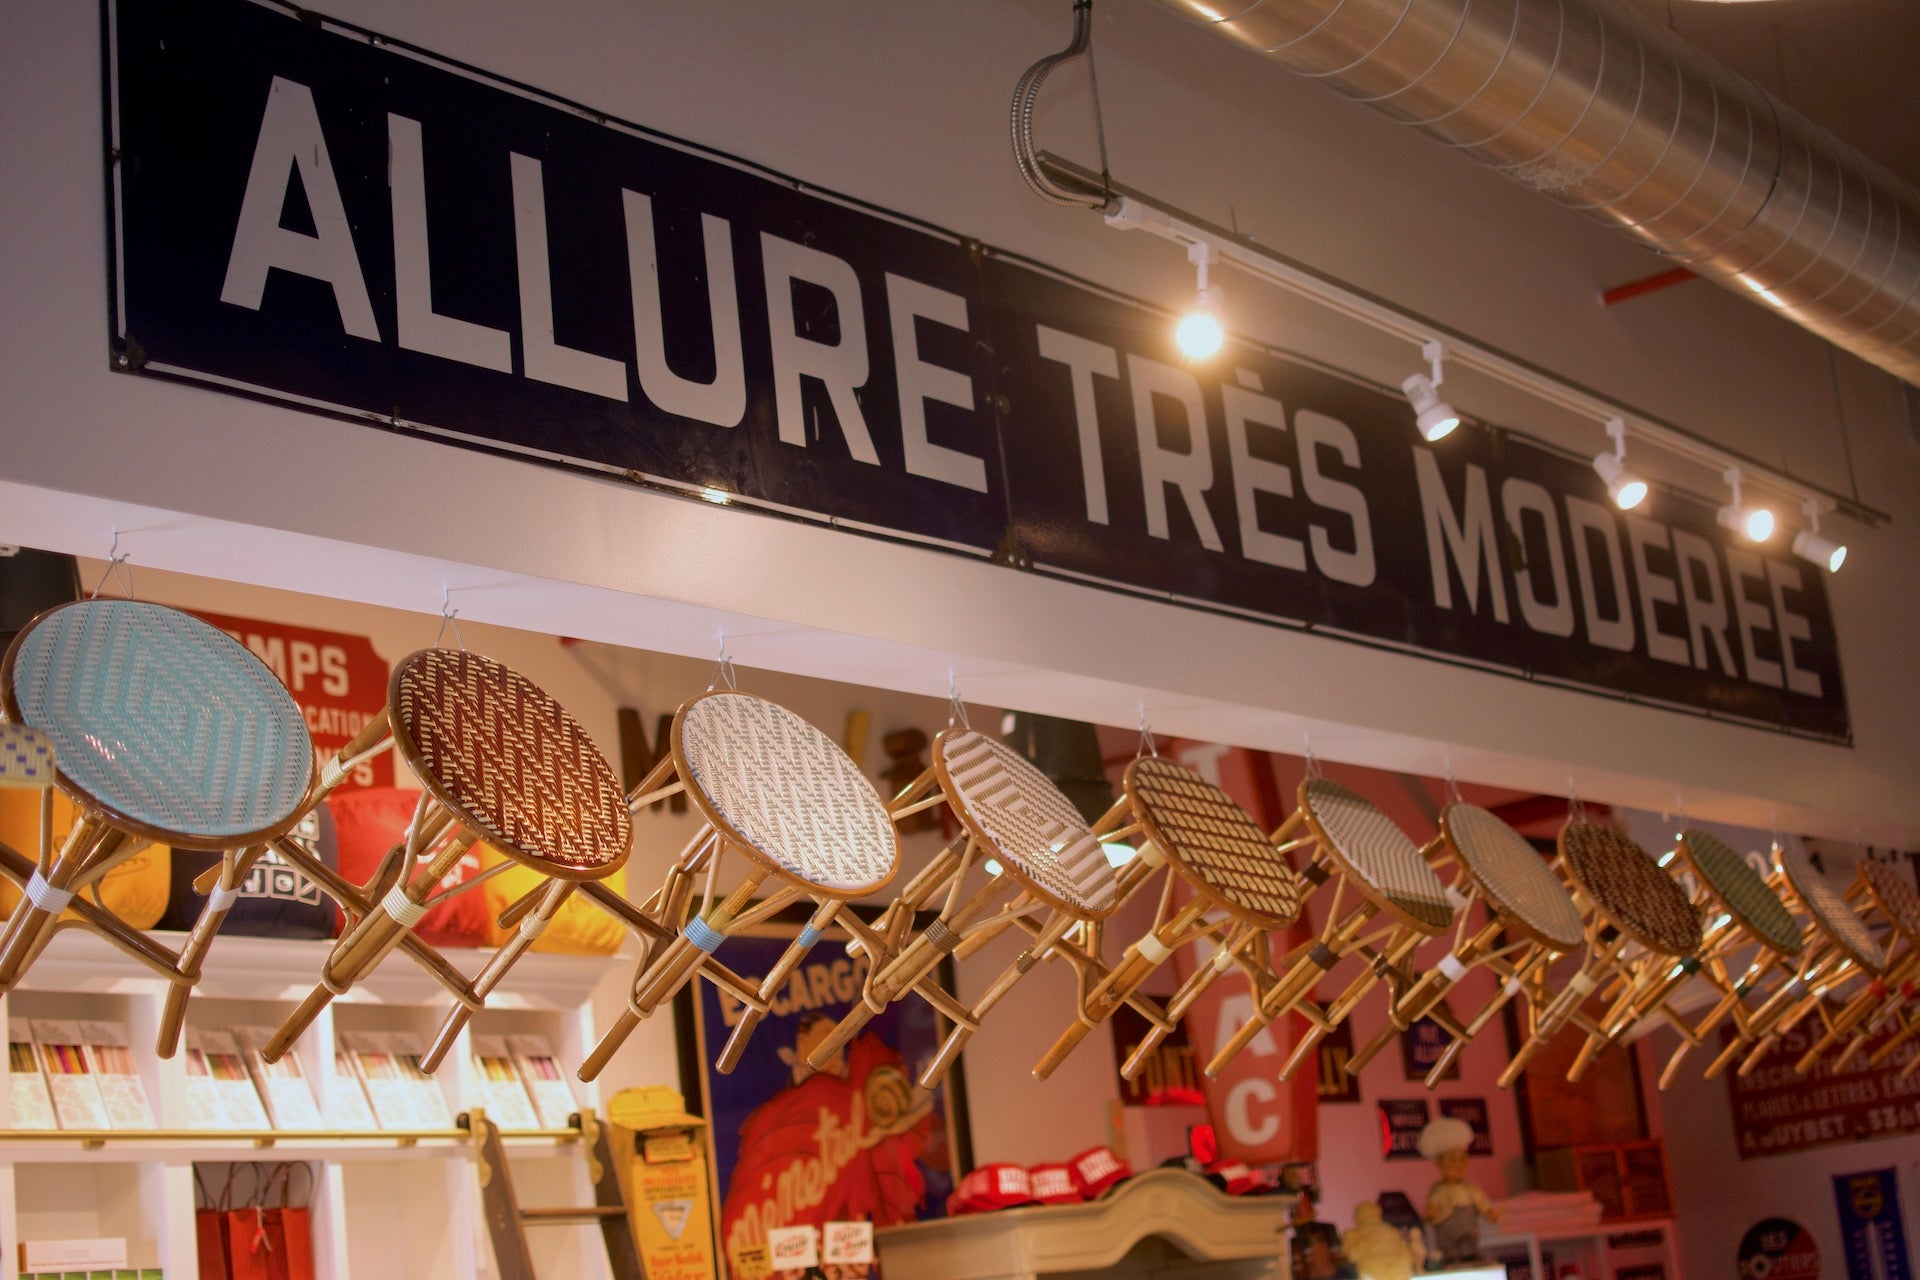 Large French sign that reads ALLURE TRES MODEREE with a collection of small stools beneath it.